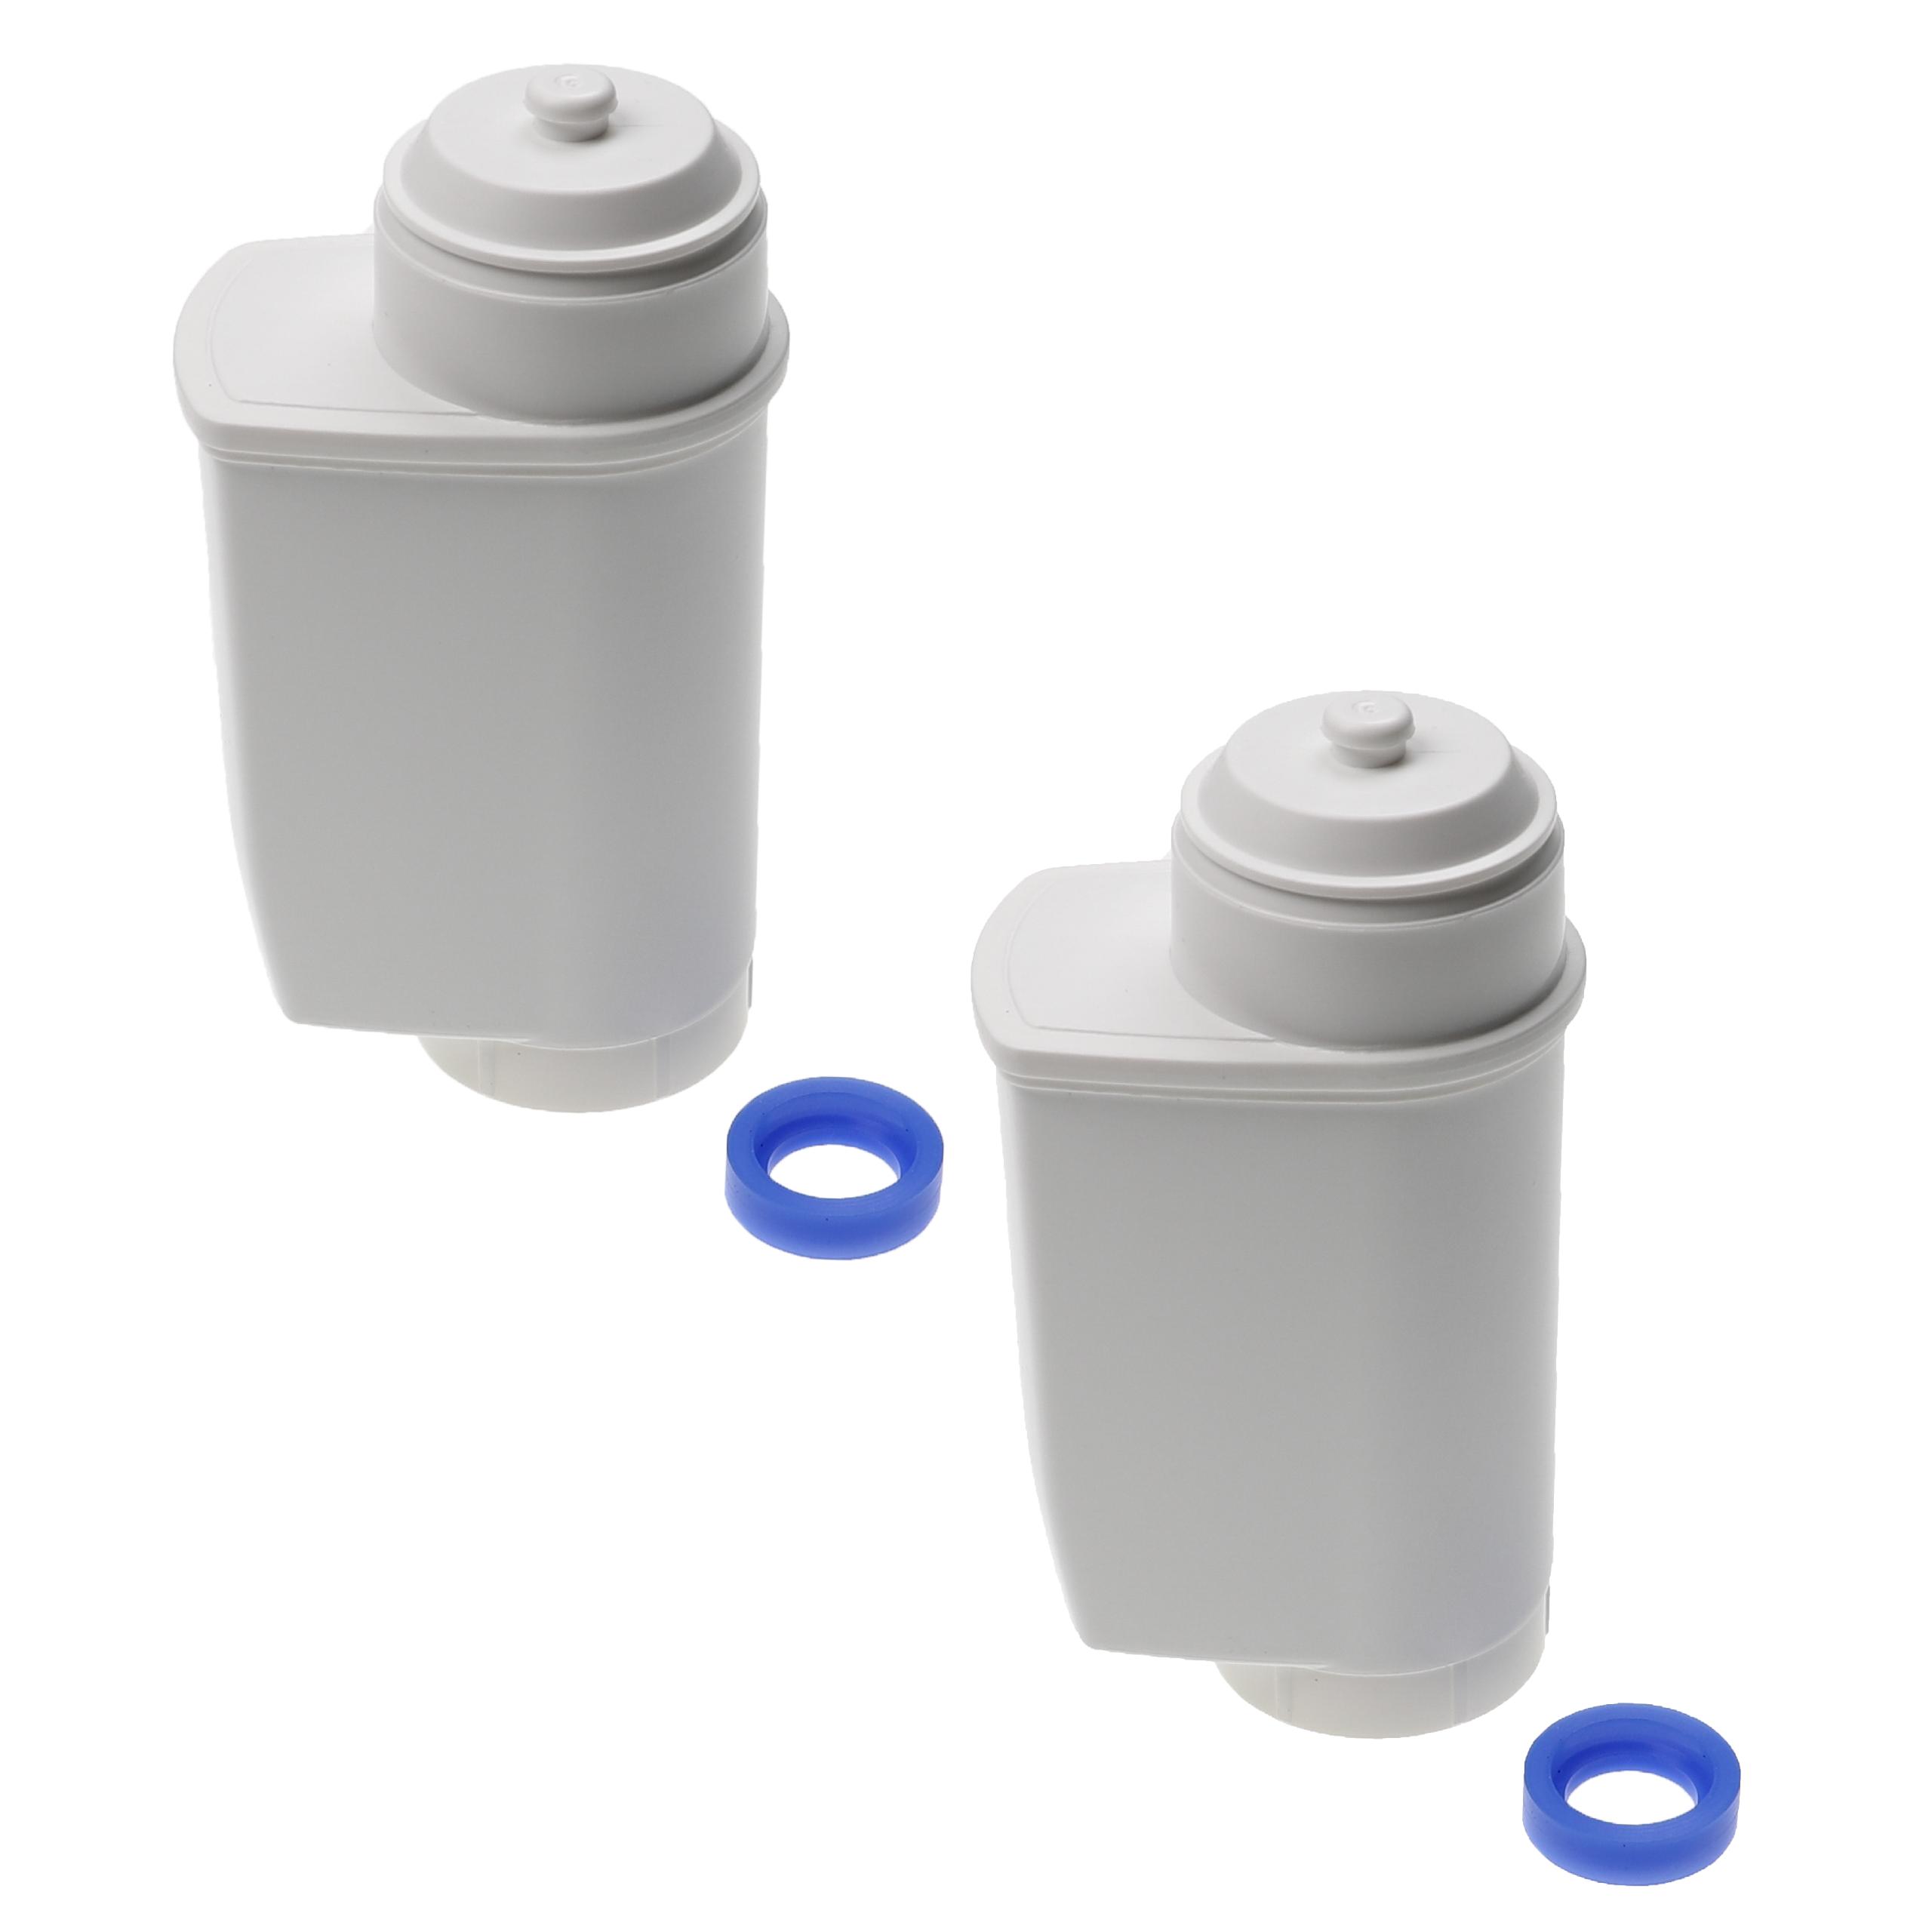 2x Water Filter replaces Siemens TZ70033 for Bosch Coffee Machine etc. - White